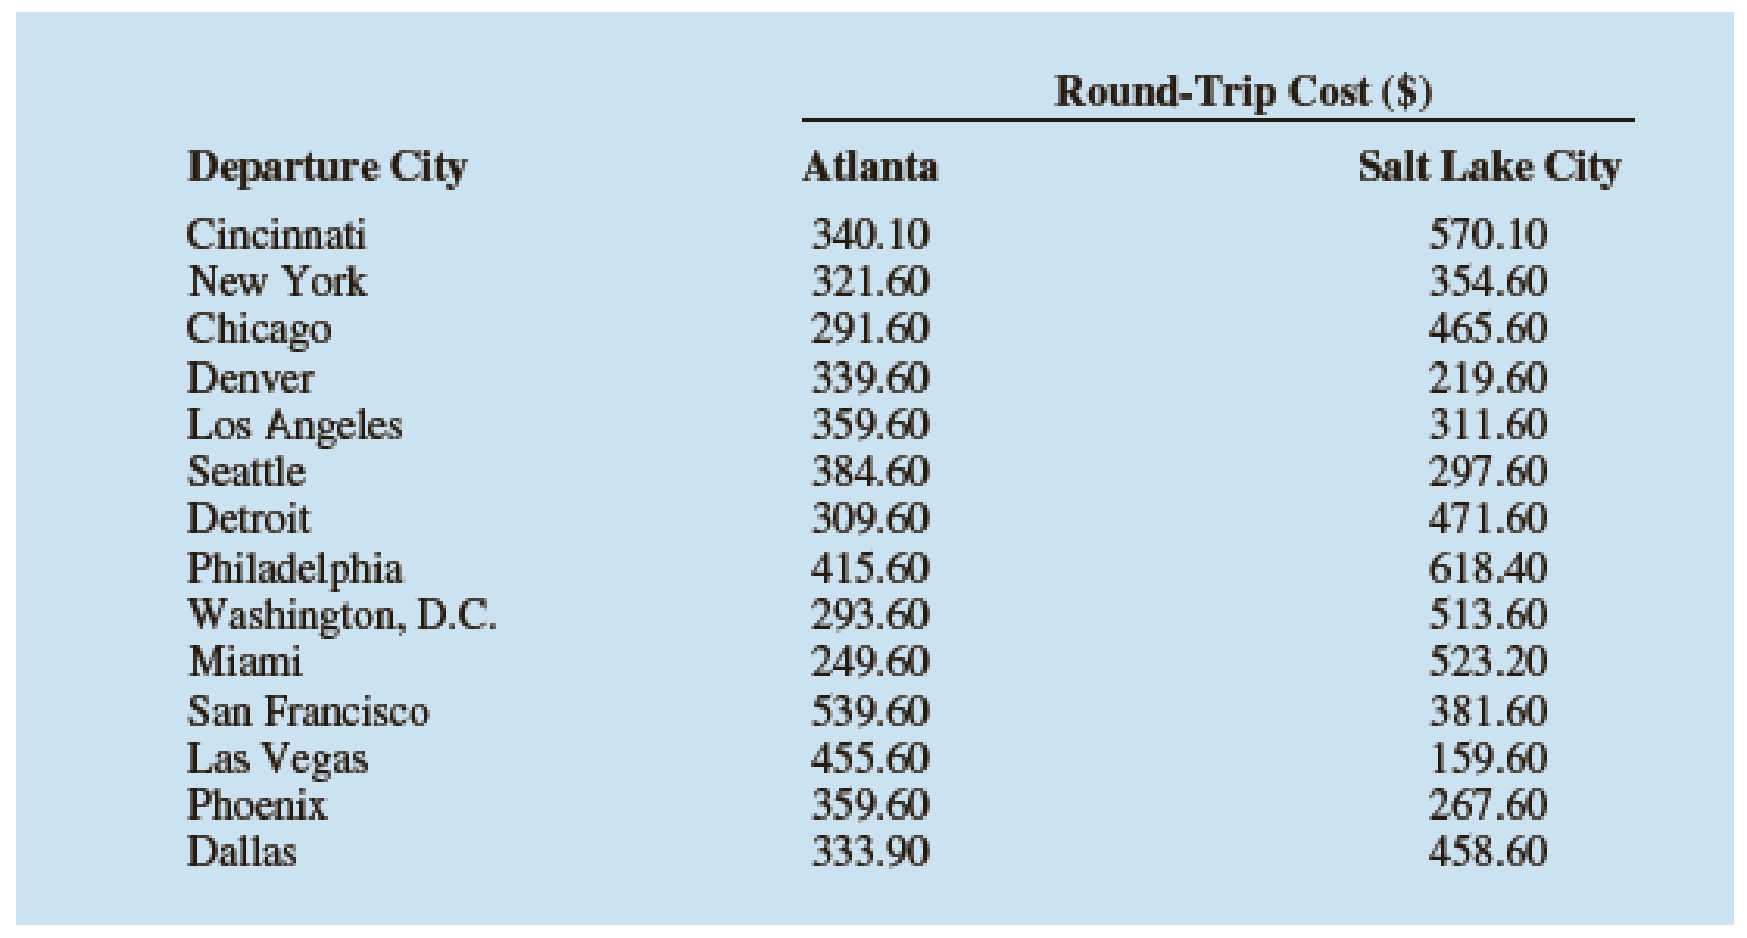 Chapter 3.2, Problem 27E, The results of a search to find the least expensive round-trip flights to Atlanta and Salt Lake City 